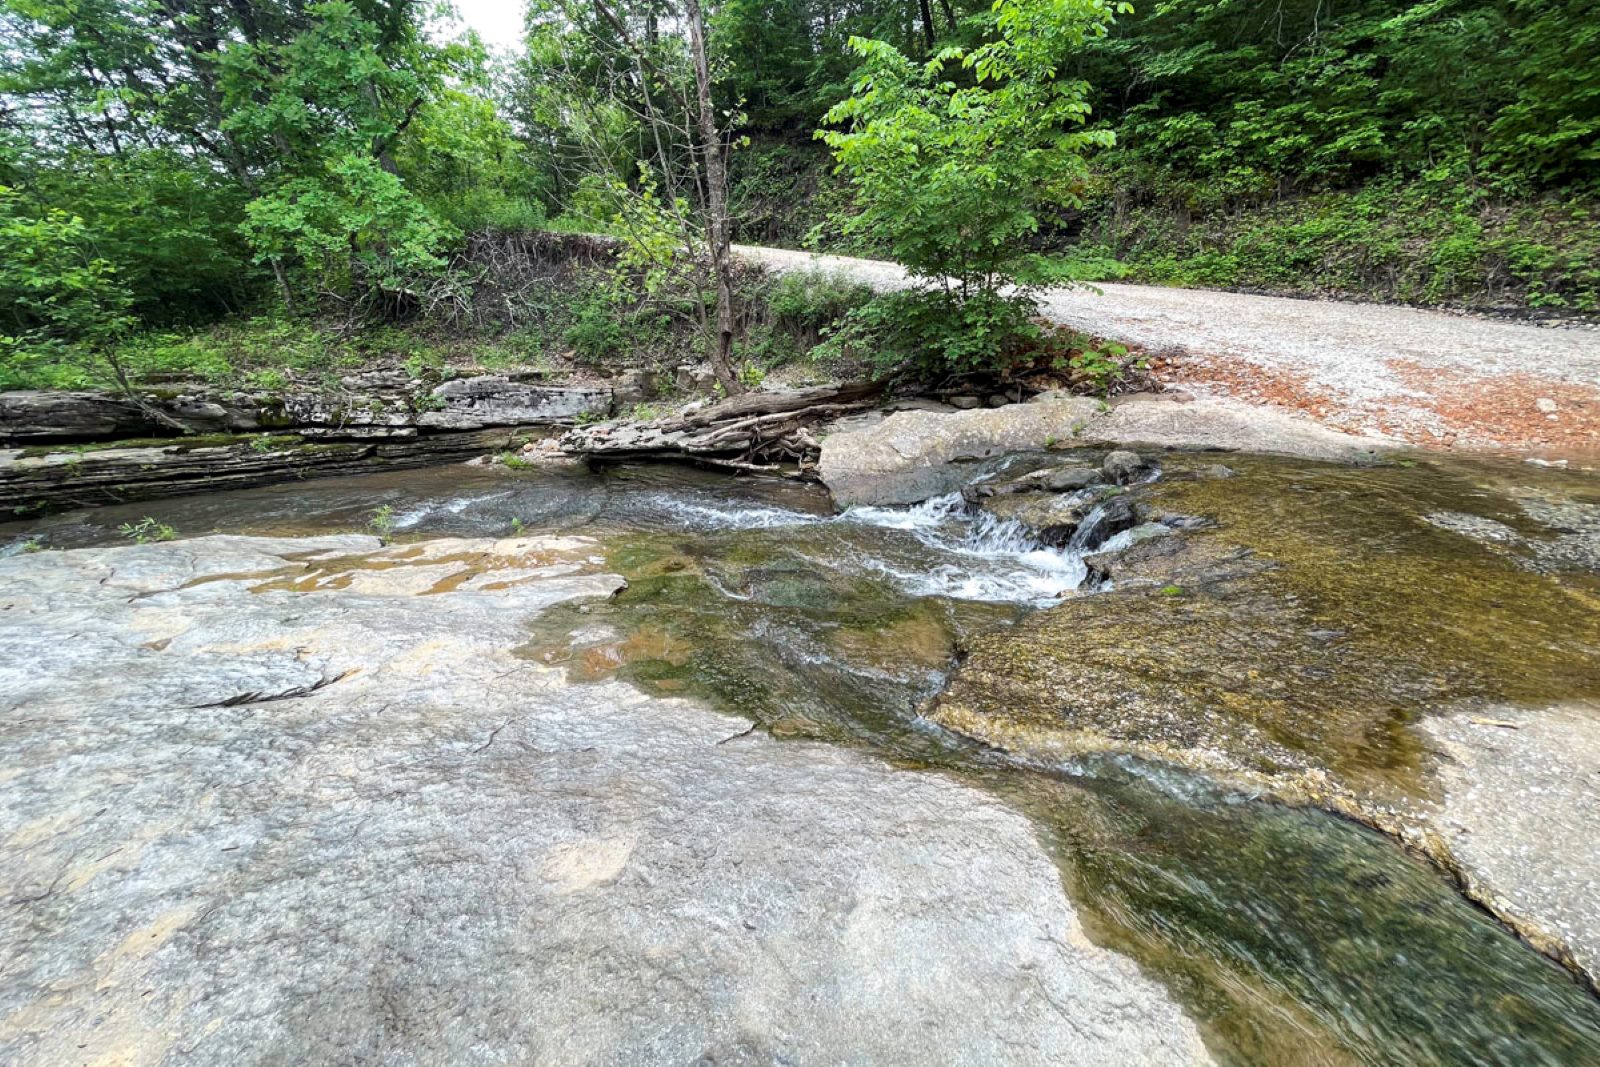 To reach the Paige and Broadwater Hollow Falls trail, hikers walk down a road to cross this low-water bridge and spillway. (Photo by Sony Hocklander)